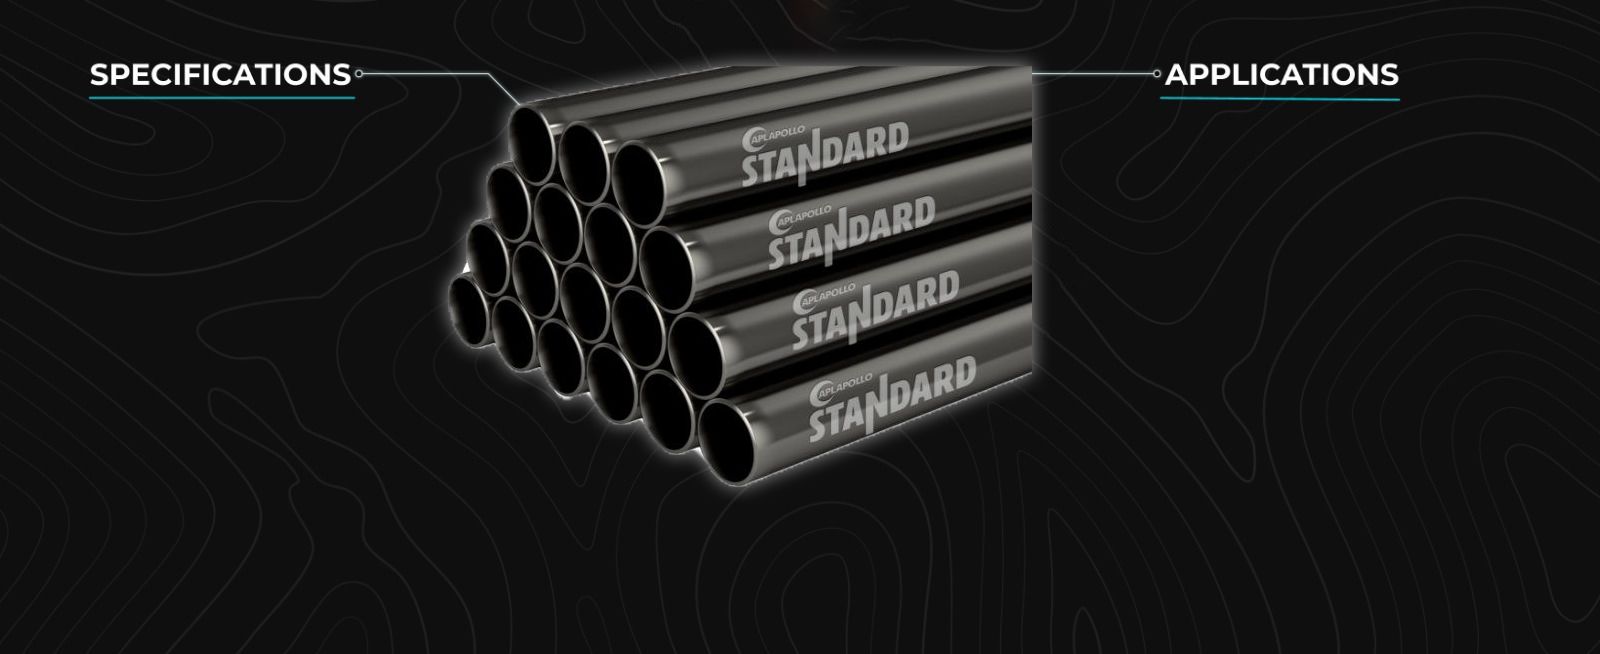 Apollo Standard Product - Structural Steel Tubes